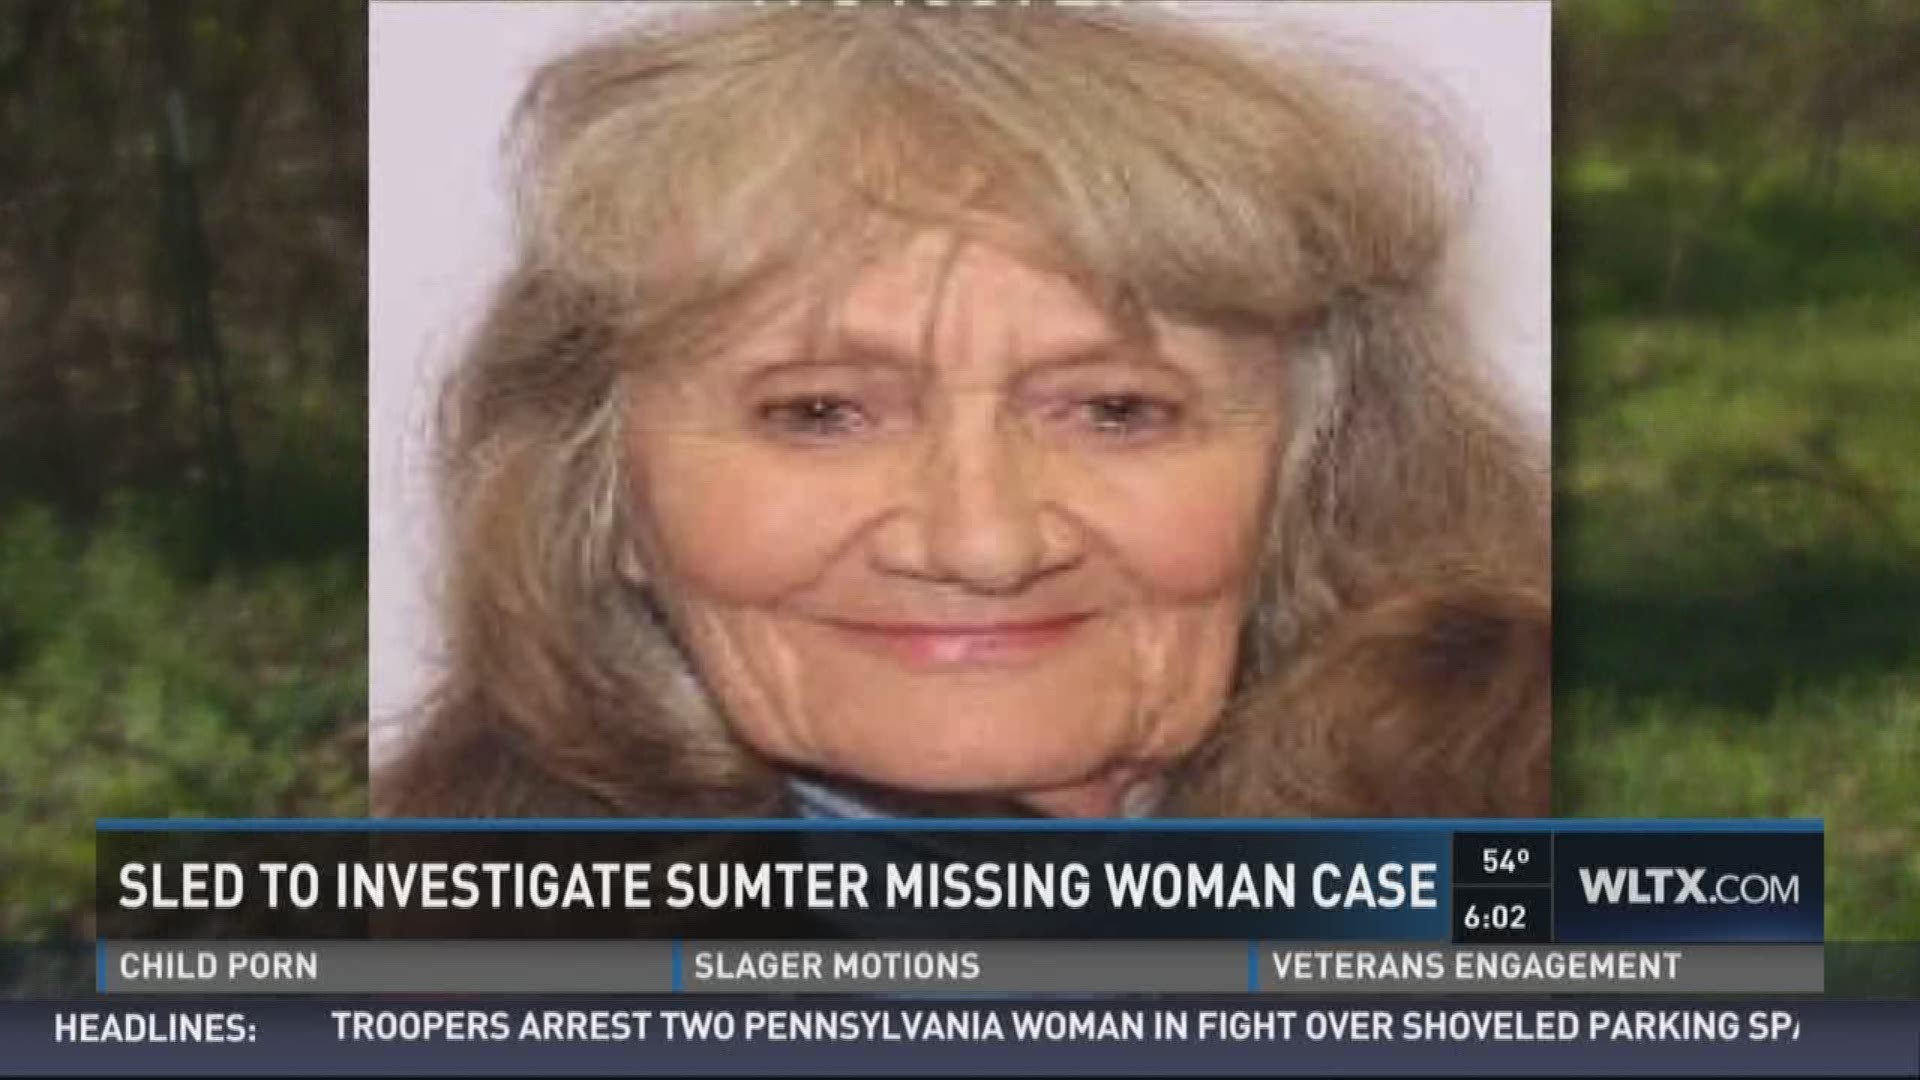 SLED now investigating missing Sumter woman case. 